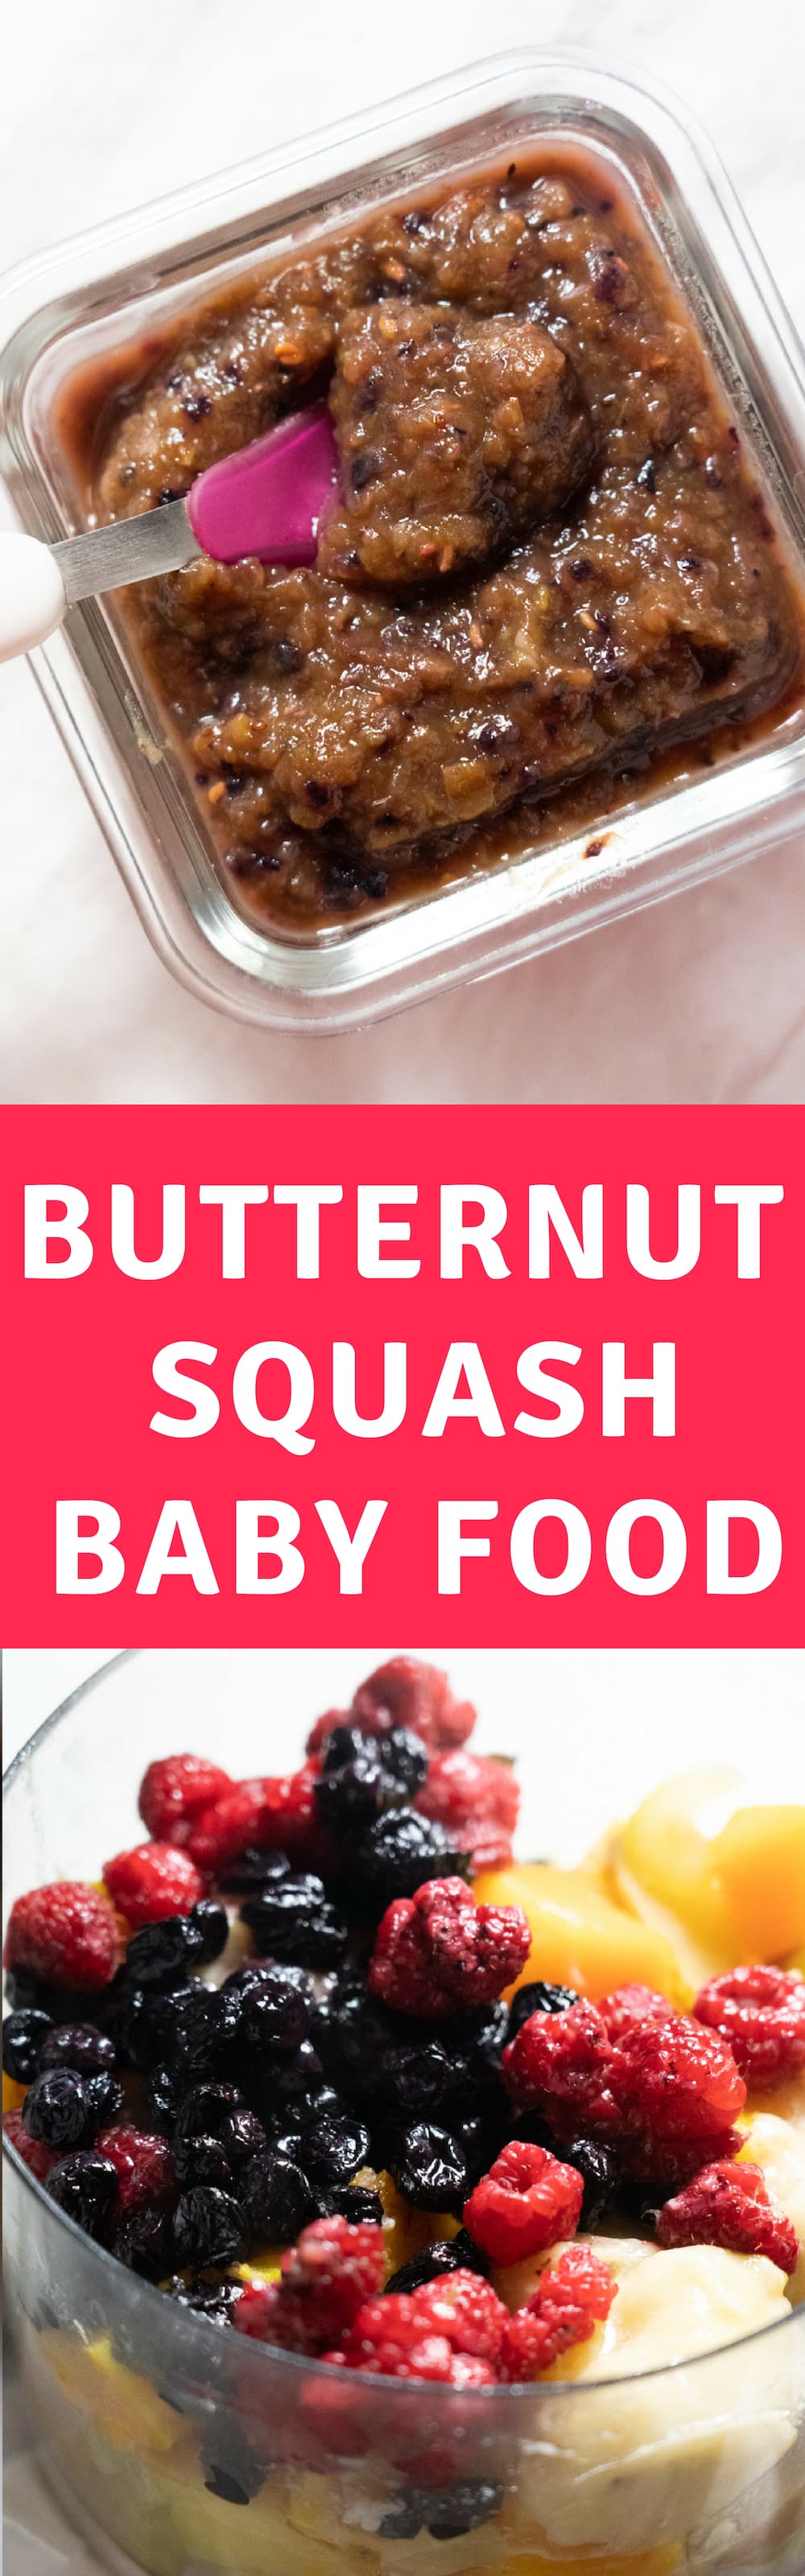 I have a picky toddler and she loves this puree, so trust me - your baby is going to love this Butternut Squash Baby Food Recipe made with fruits and vegetables! And even better, it's easy to make!  This is a nutritious Stage 2 and Stage 3 puree for baby, or to serve to toddlers in pouches. 